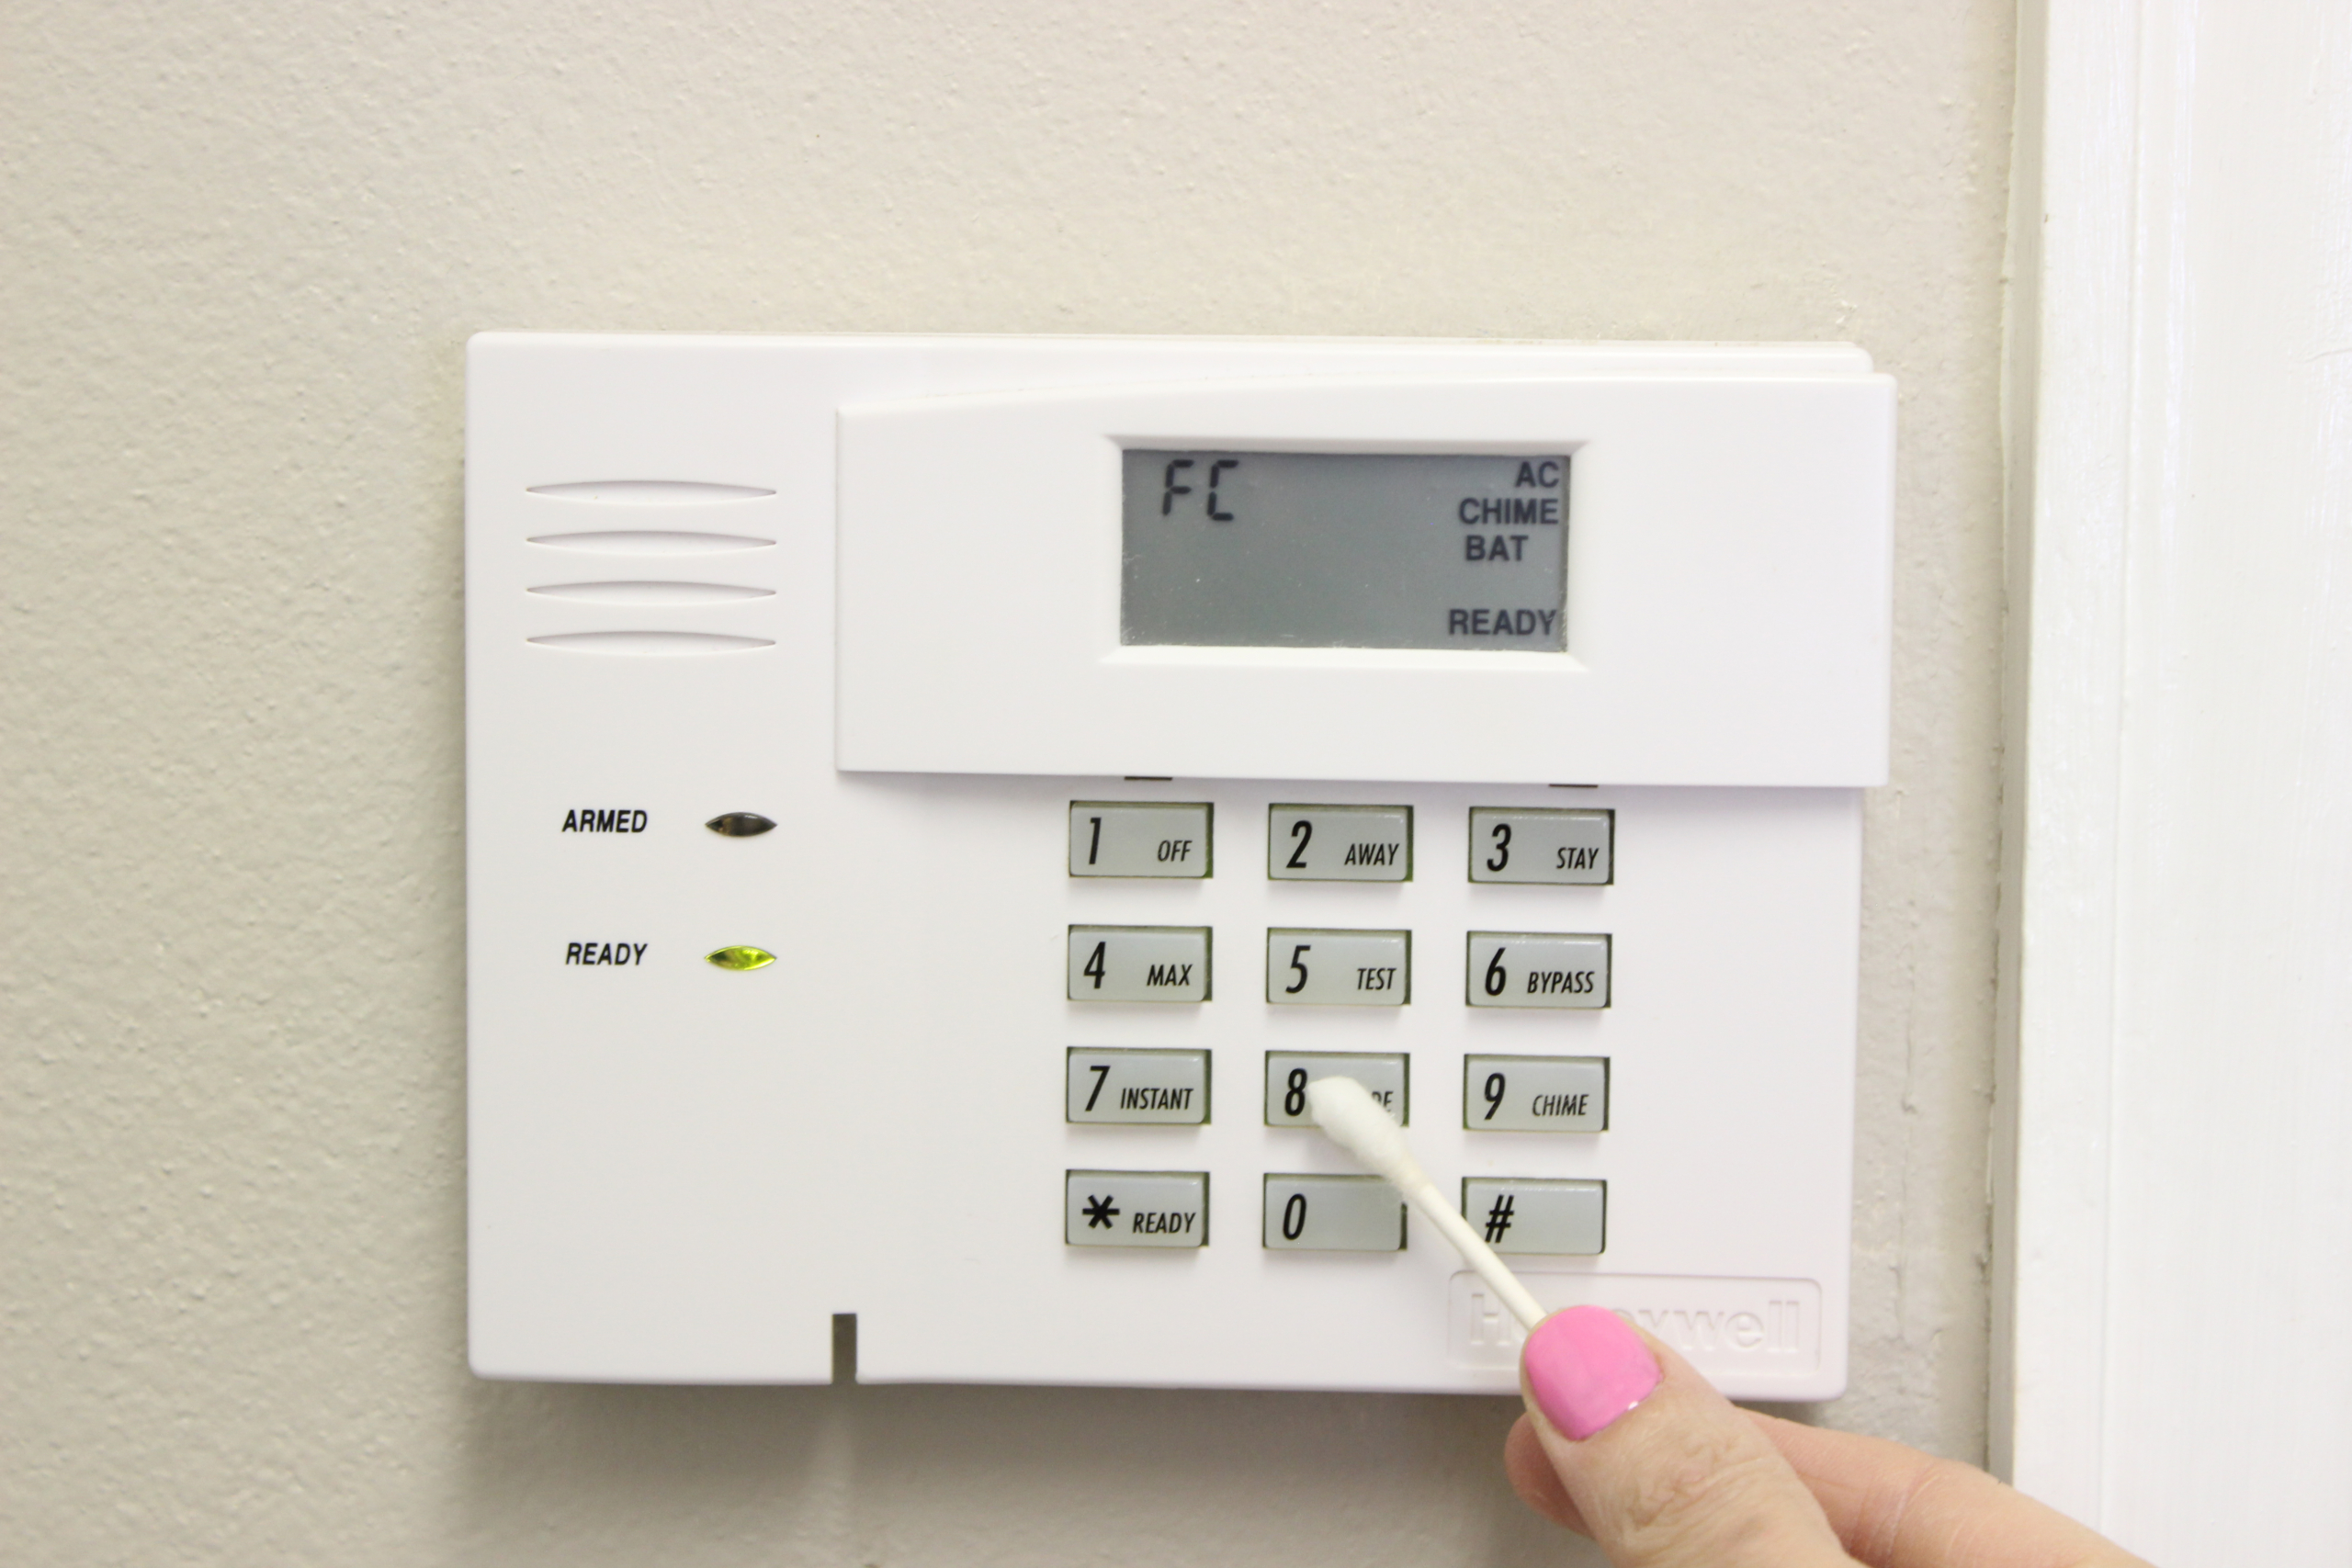 things you forget to clean - alarm keypad